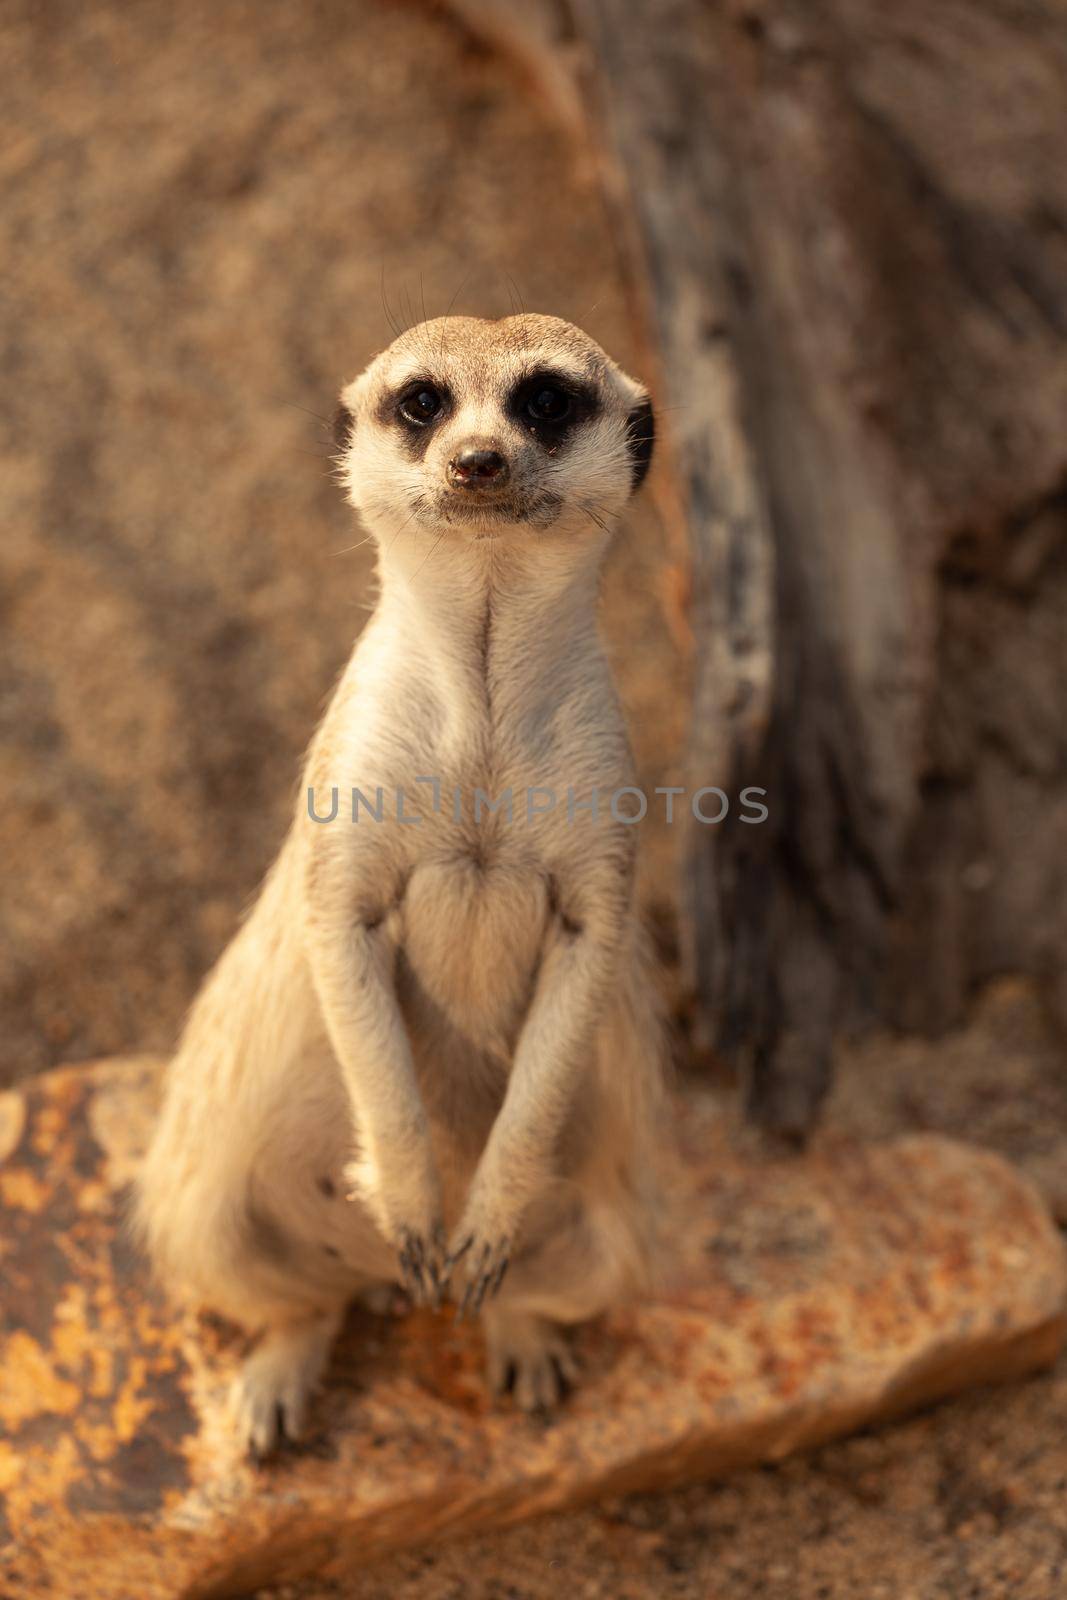 A family of meerkats fears an attack from air predators by gordiza